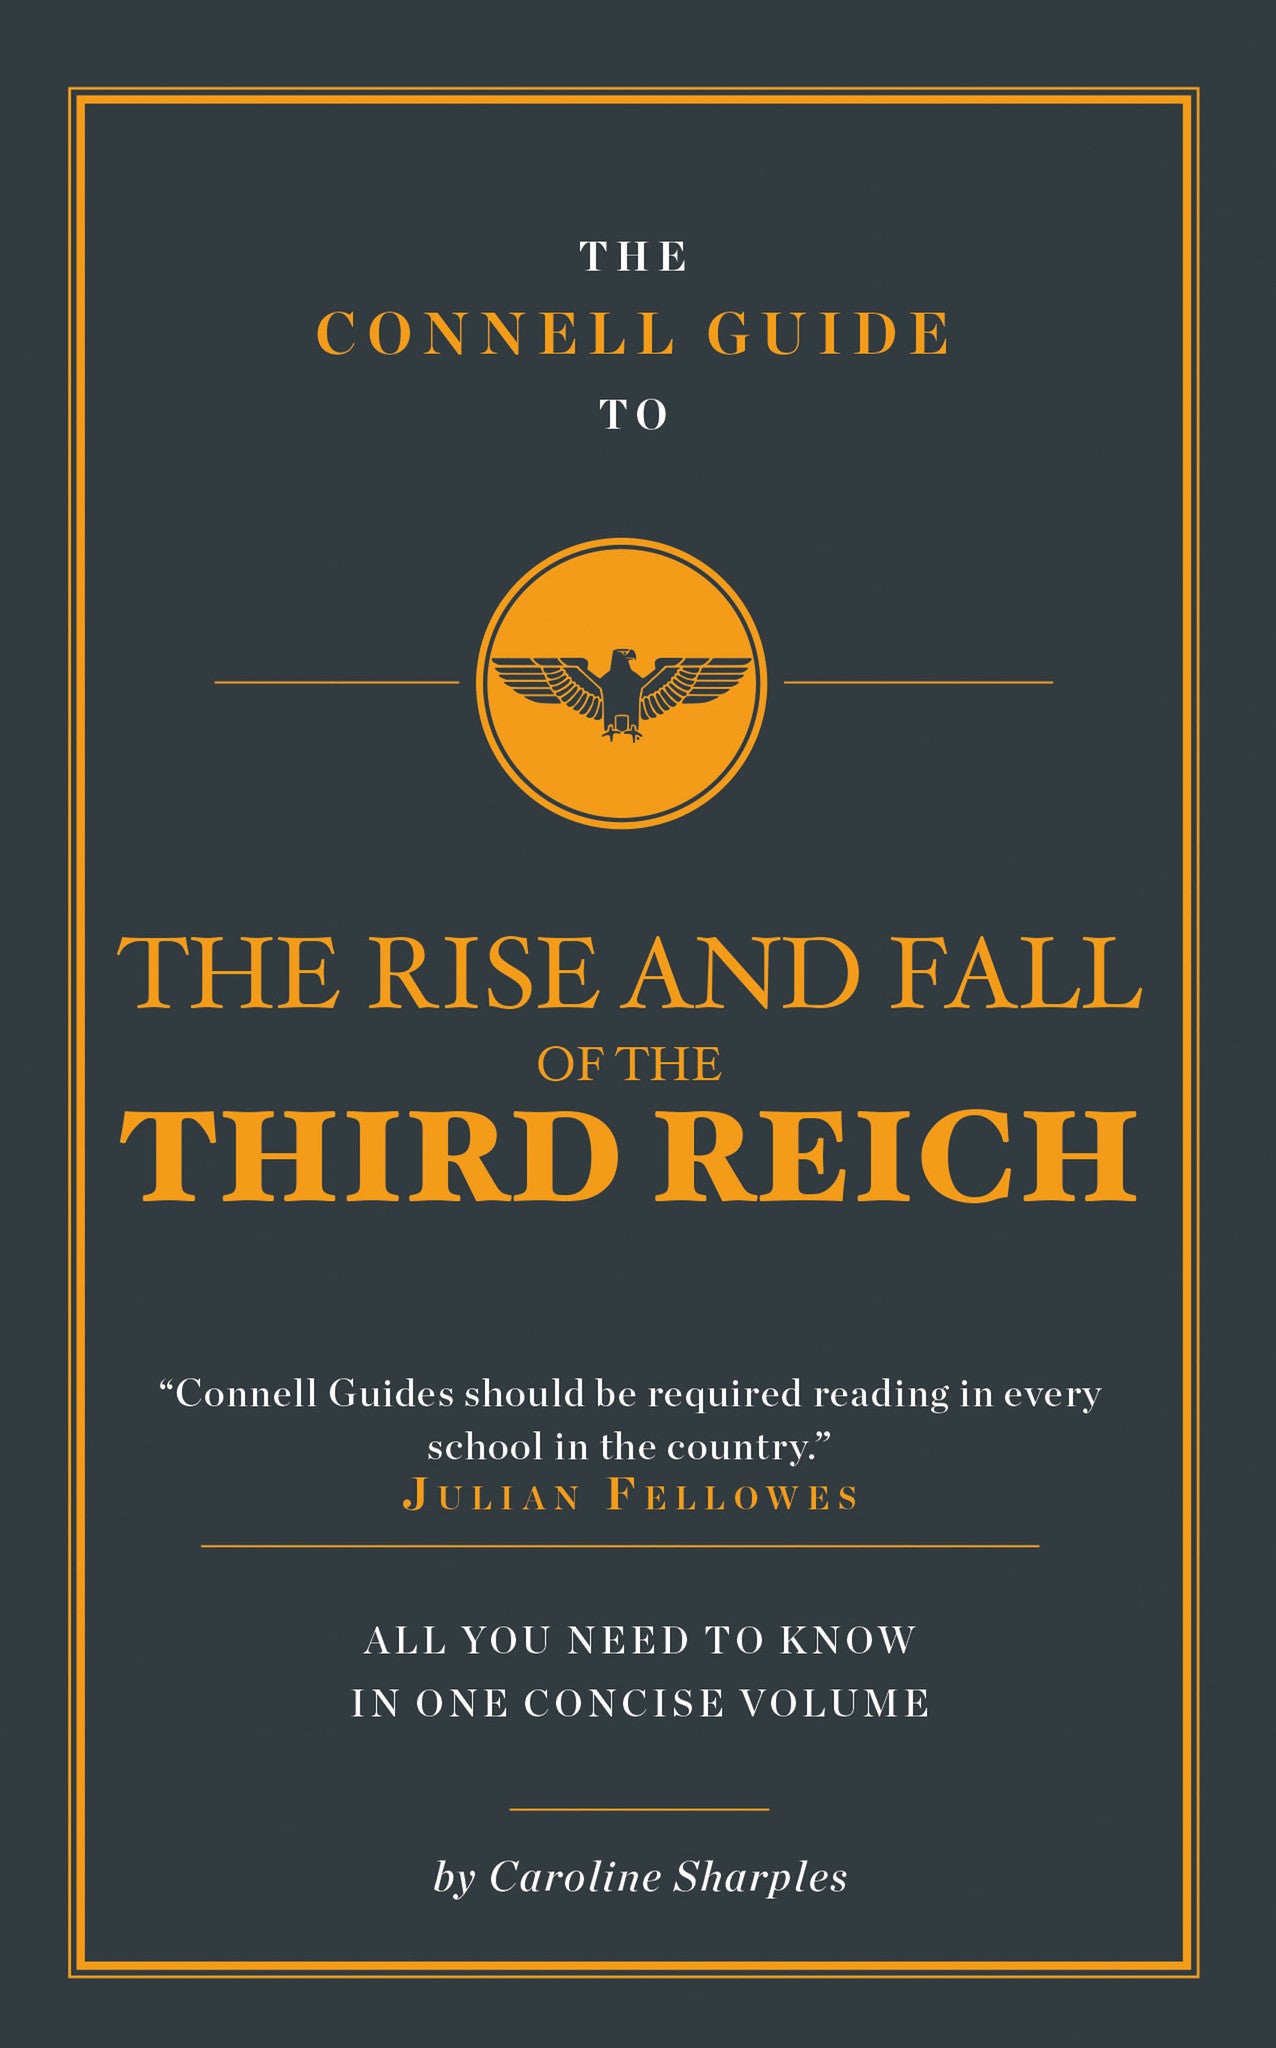 The Connell Guide to The Third Reich